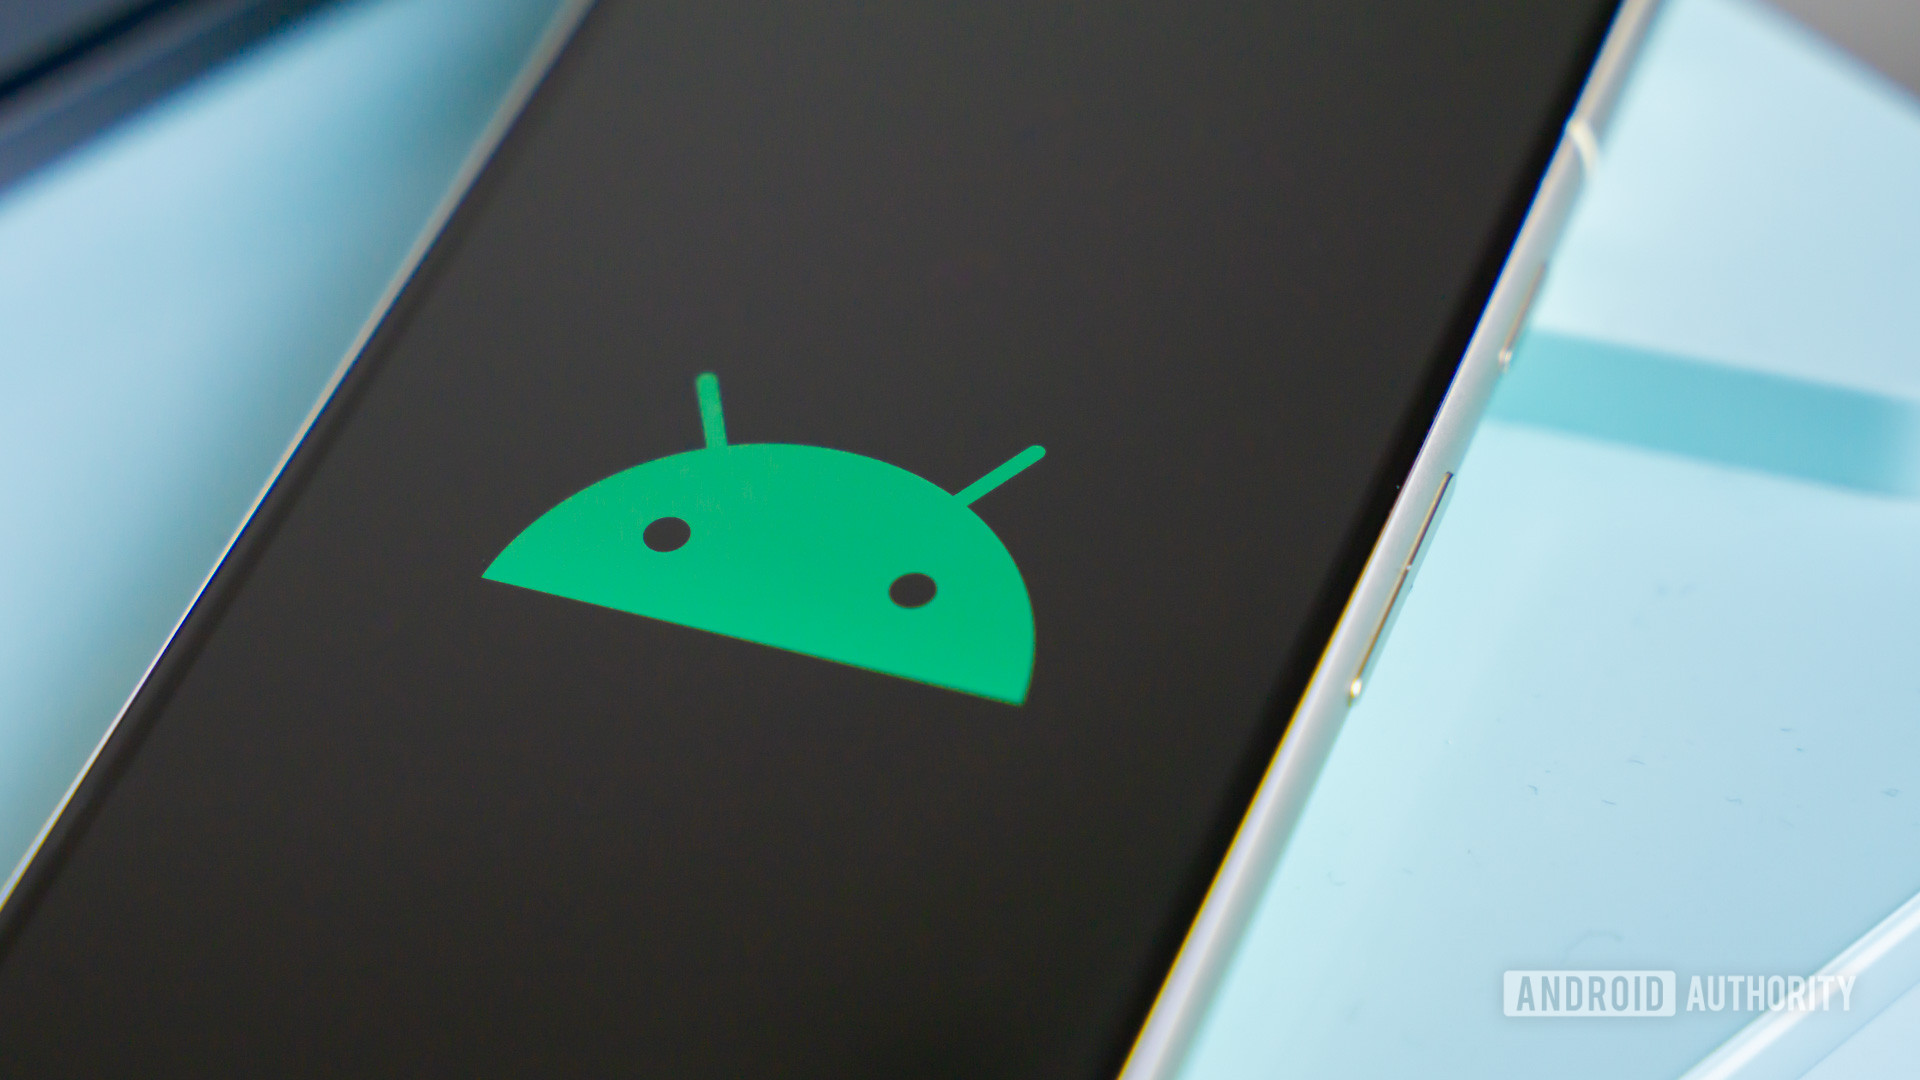 Android logo on smartphone stock photo (6)